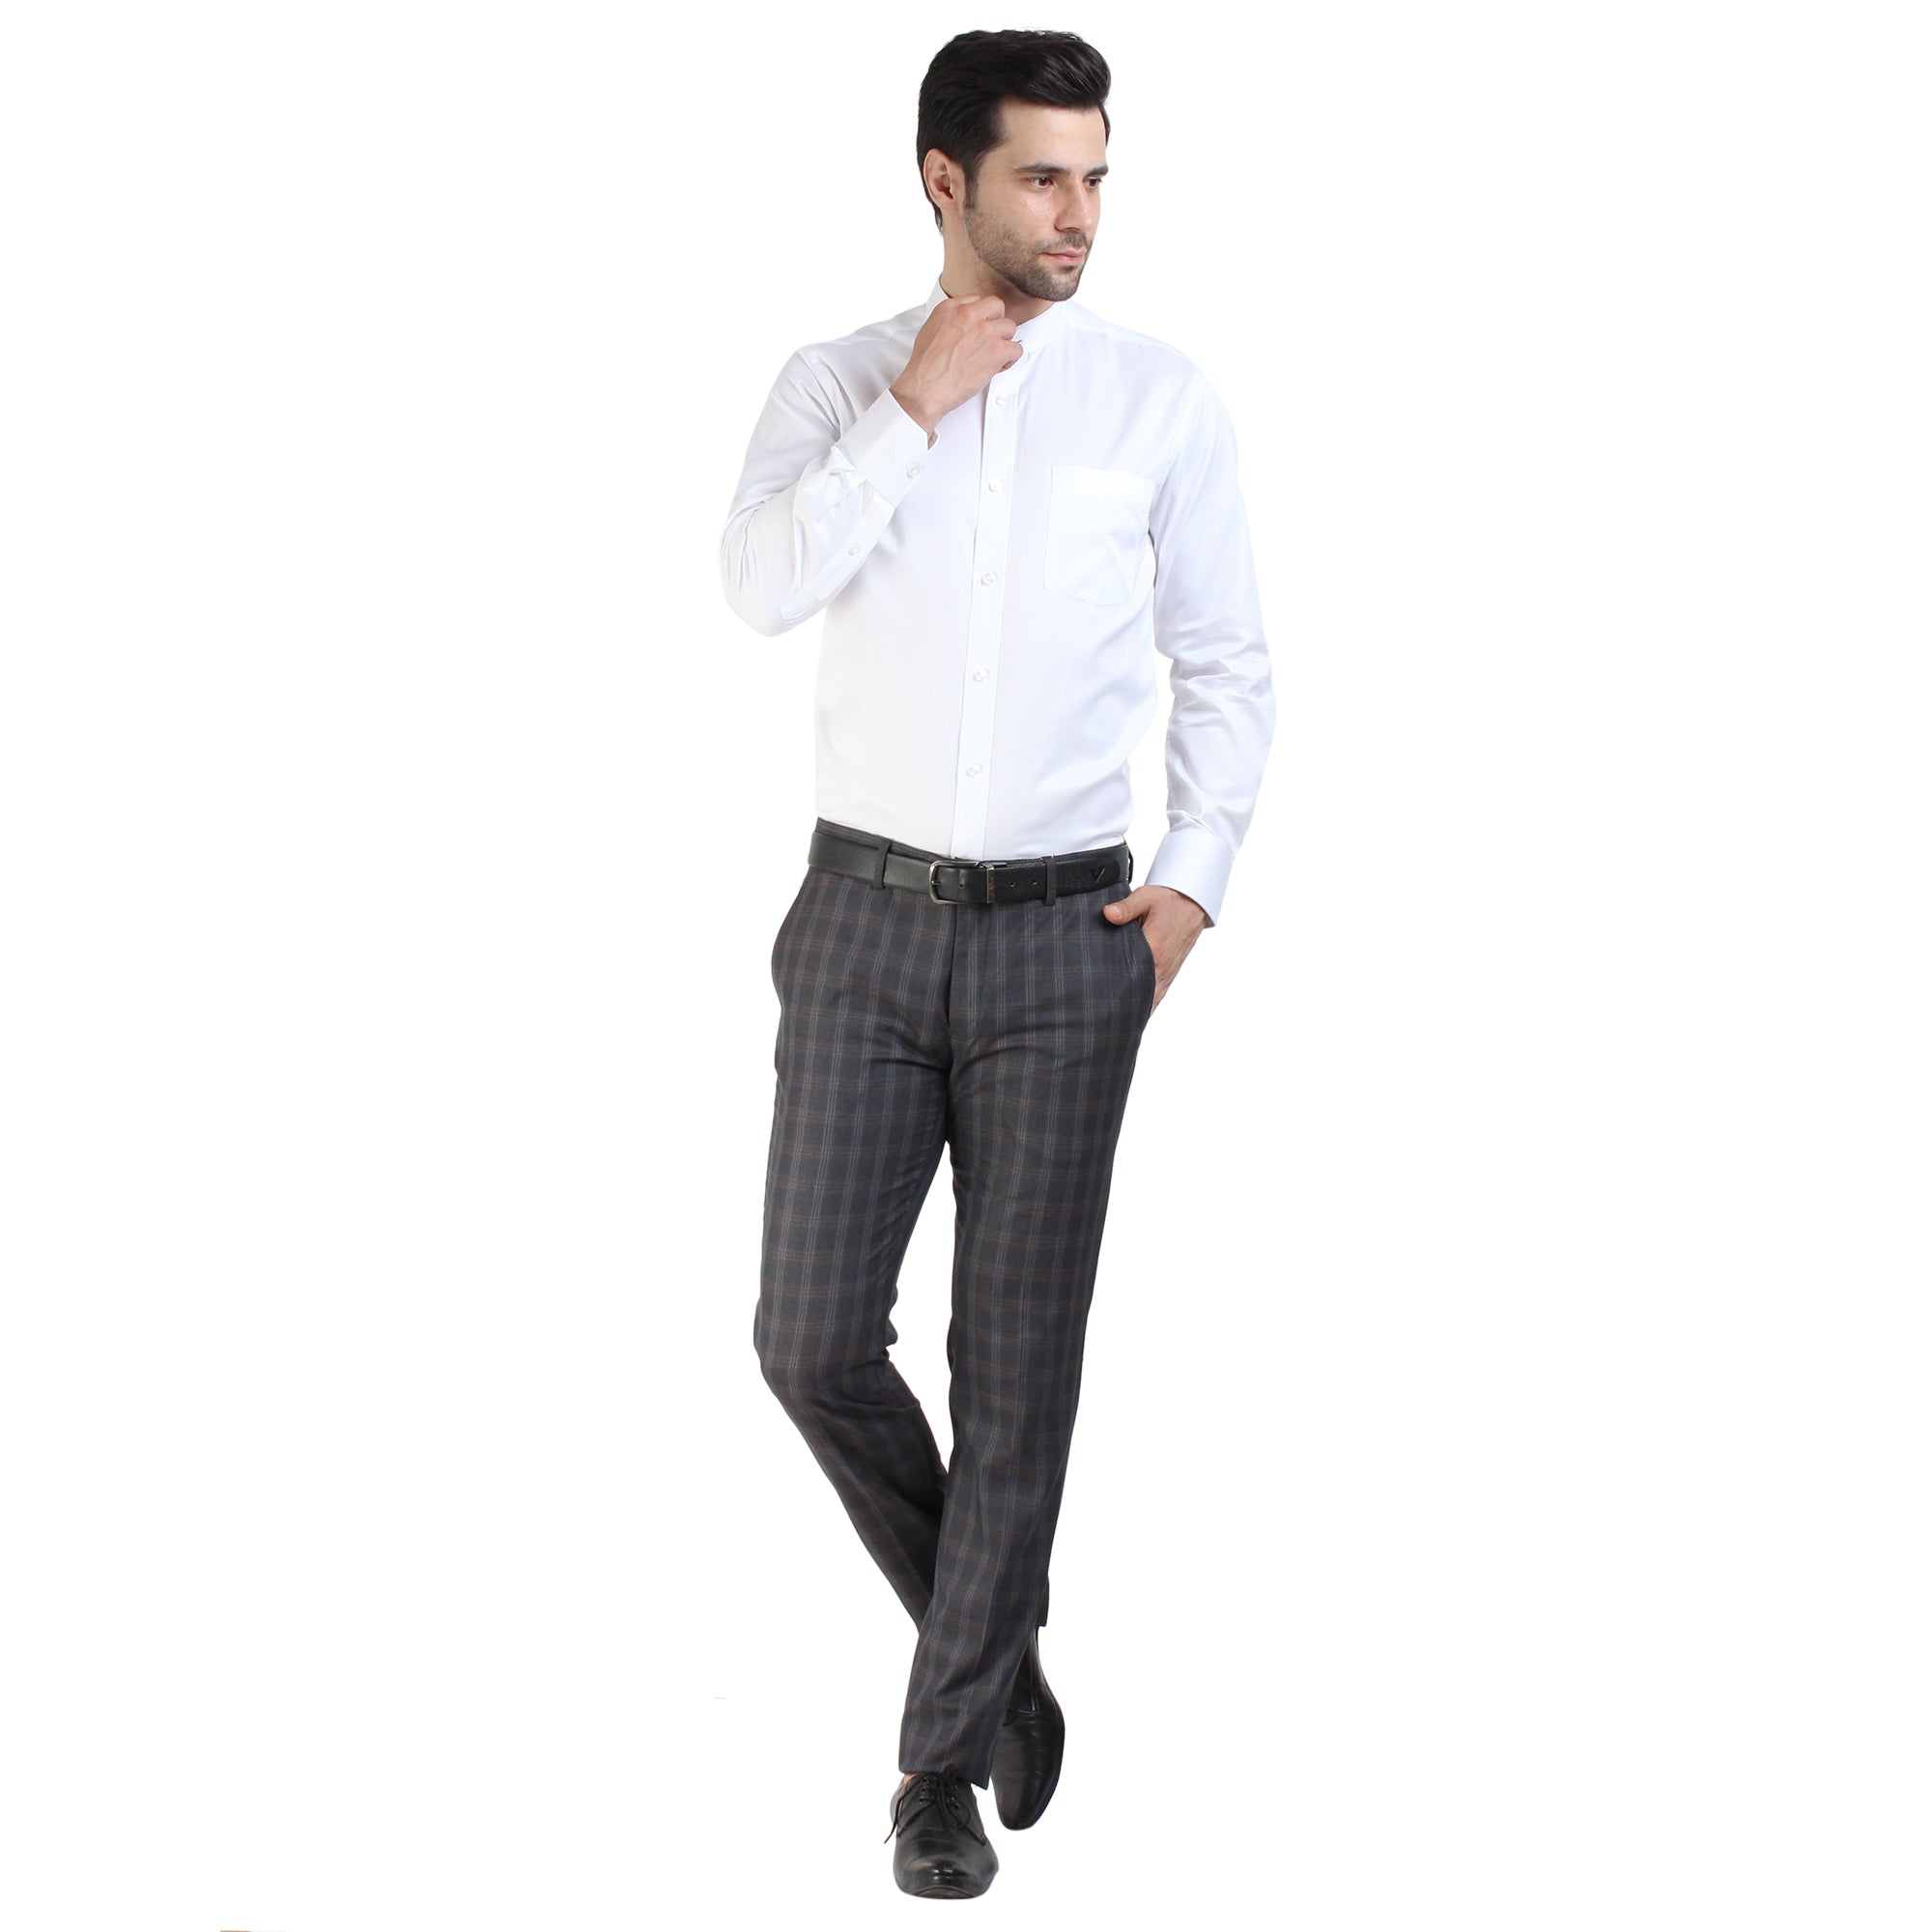 Givo Navy Cotton Trouser in Delhi - Dealers, Manufacturers & Suppliers -  Justdial